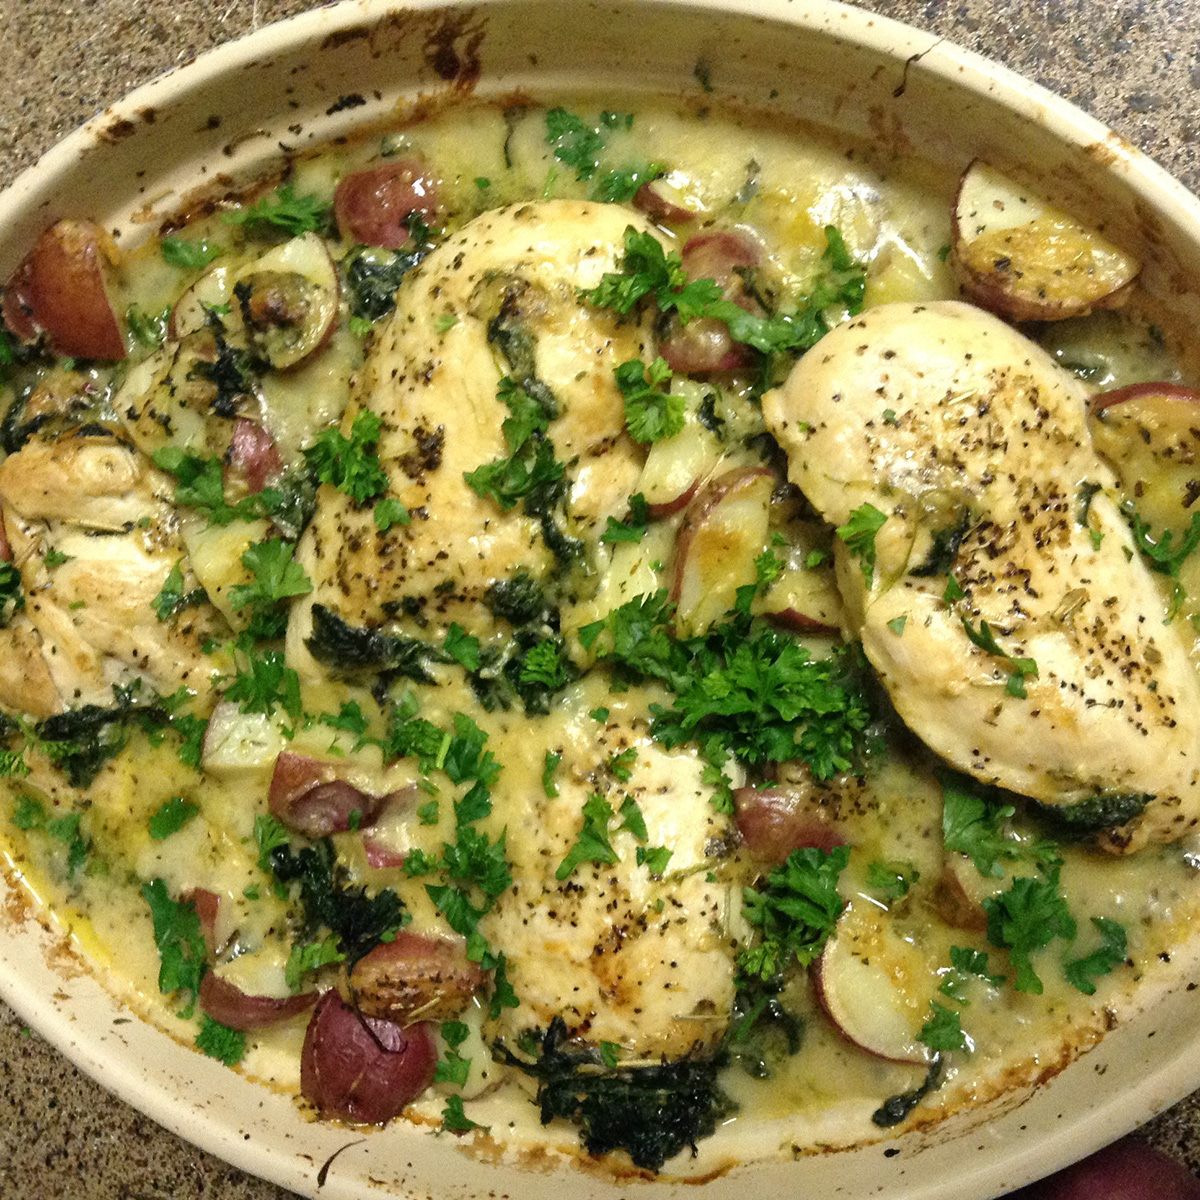 Creamy Baked Chicken Breasts with Mushrooms